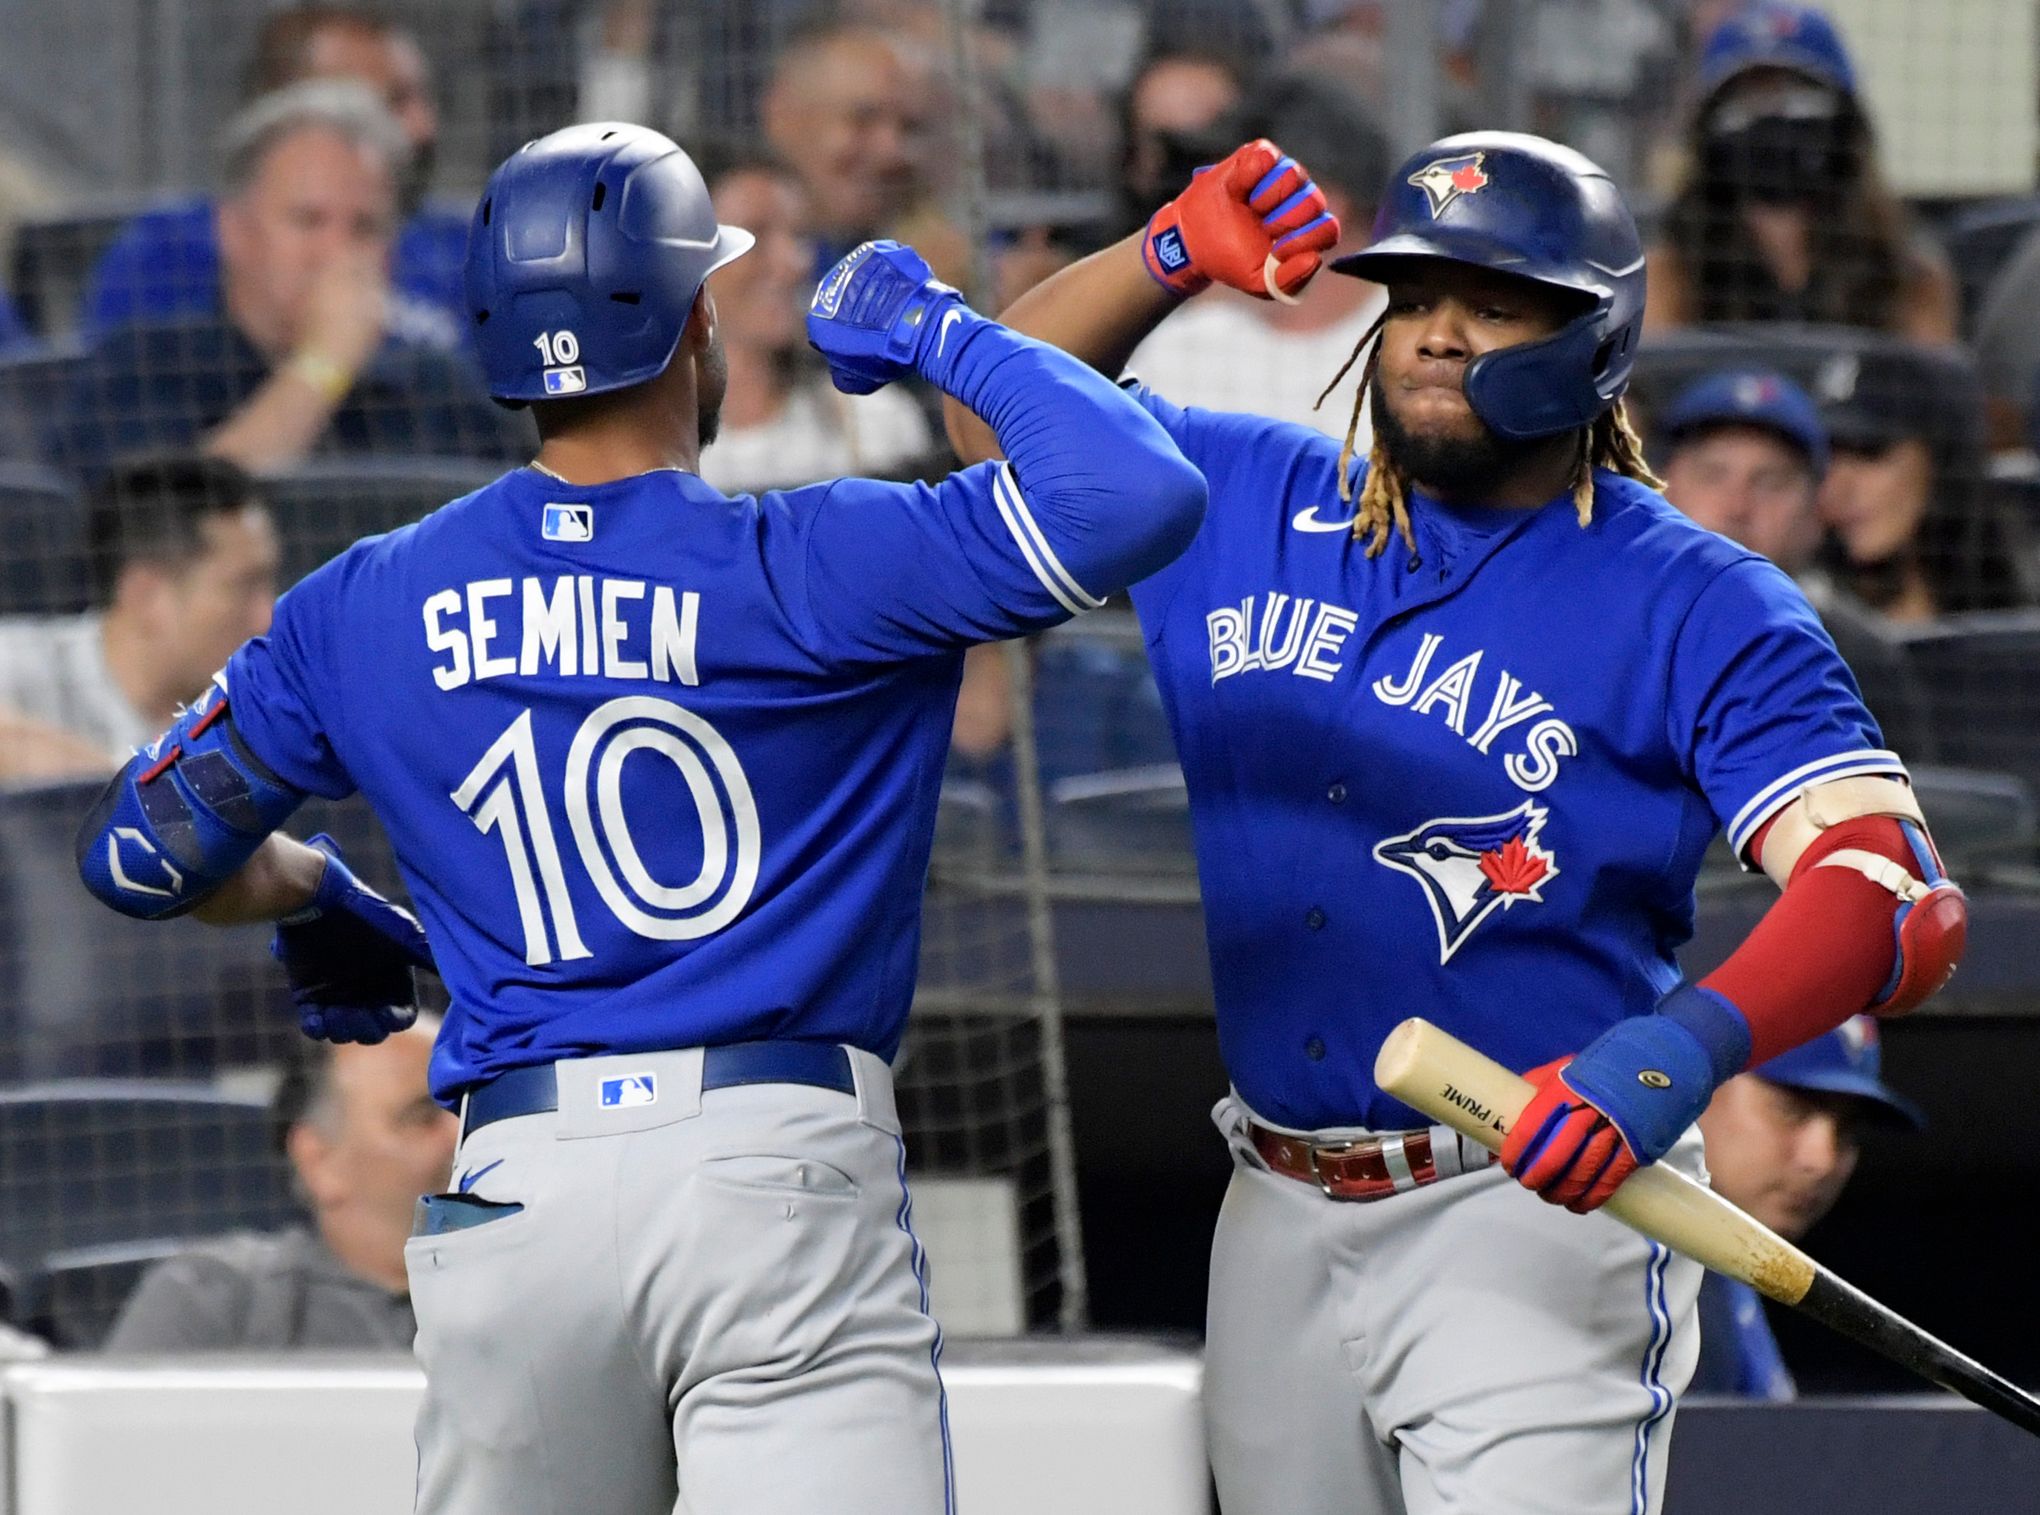 Play ball! Blue Jays beat Yankees 3-2 in 10 innings in 2021 MLB